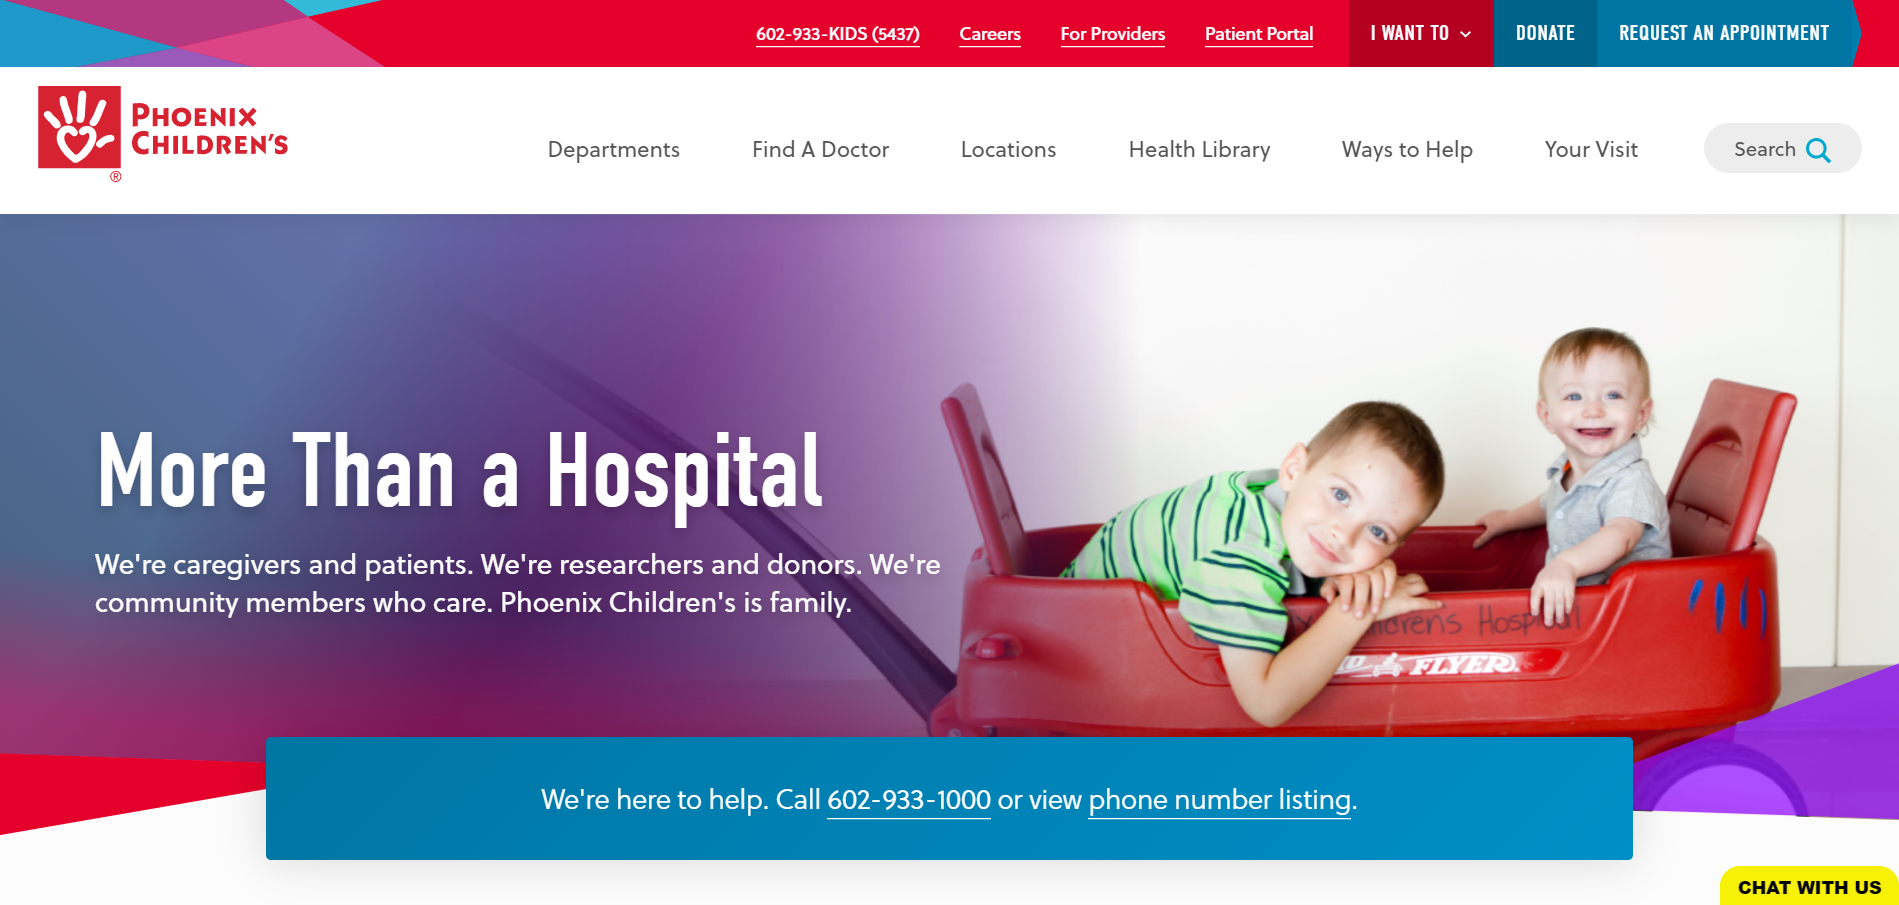 The Phoenix Children's Hospital website uses bright colors and fun graphics